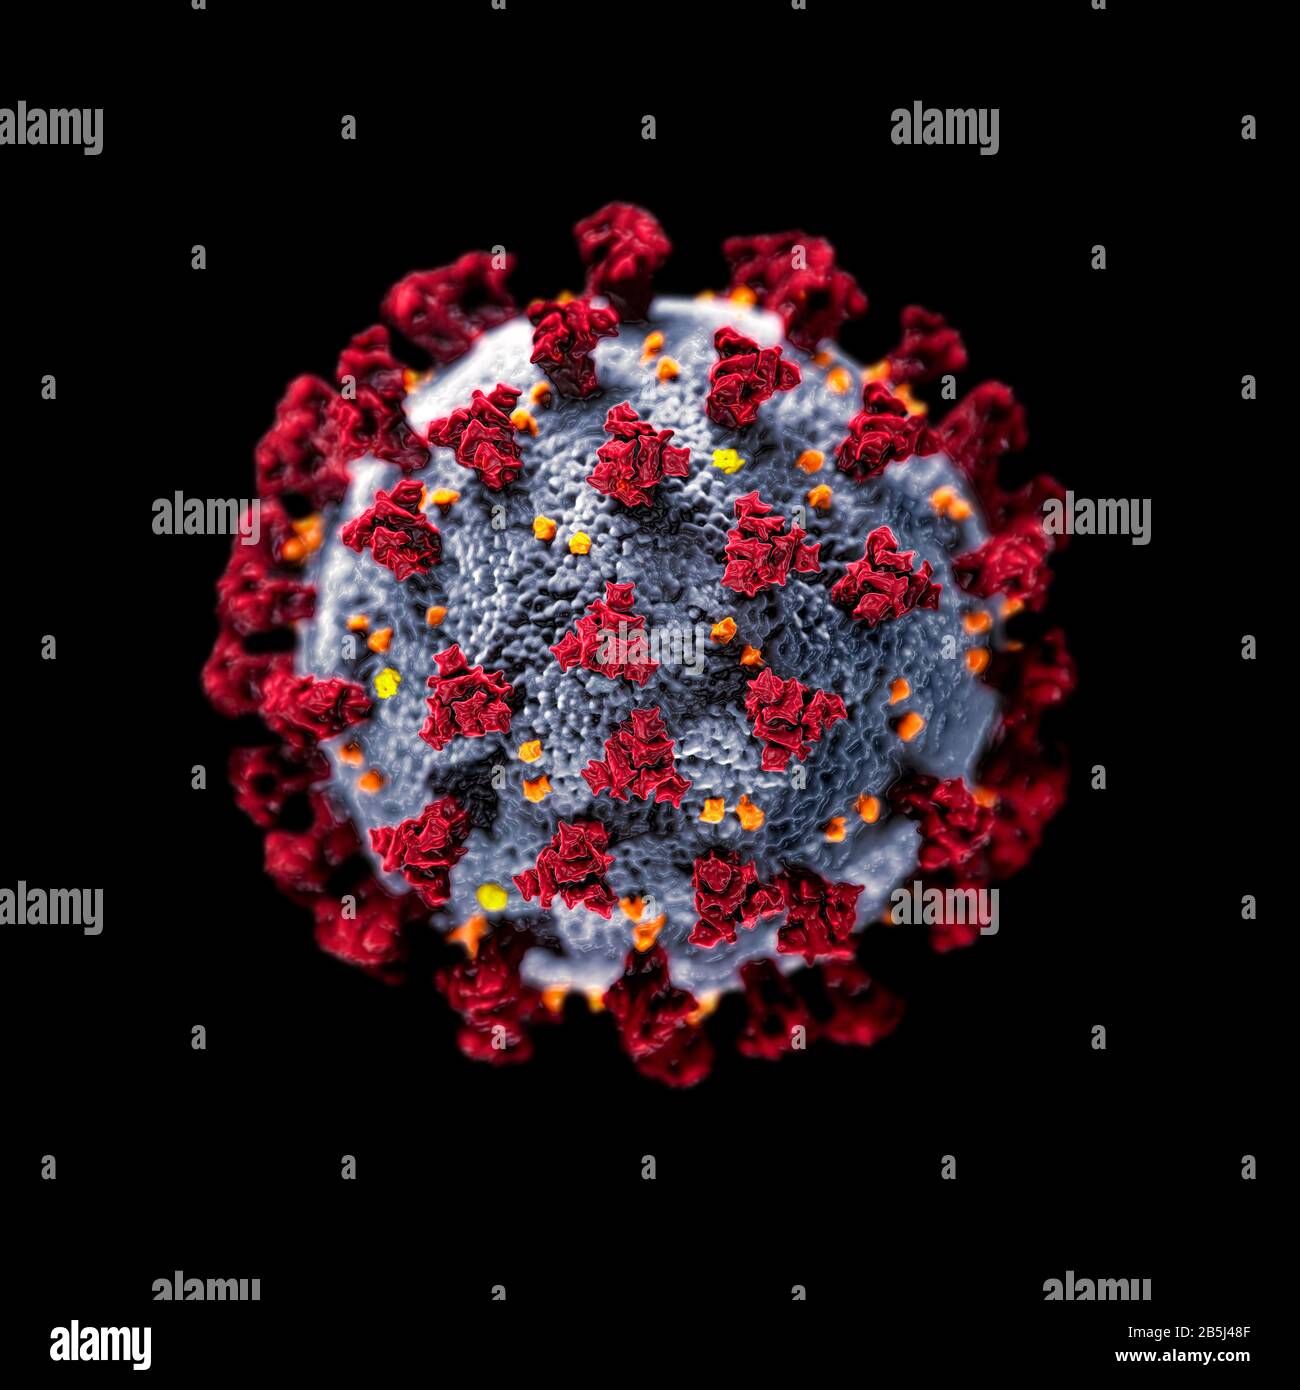 A computer rendering of SARS-CoV-2 virus on black background (Severe Acute Respiratory Syndrome Coronavirus 2) - COVID 19 virion particle. Stock Photo